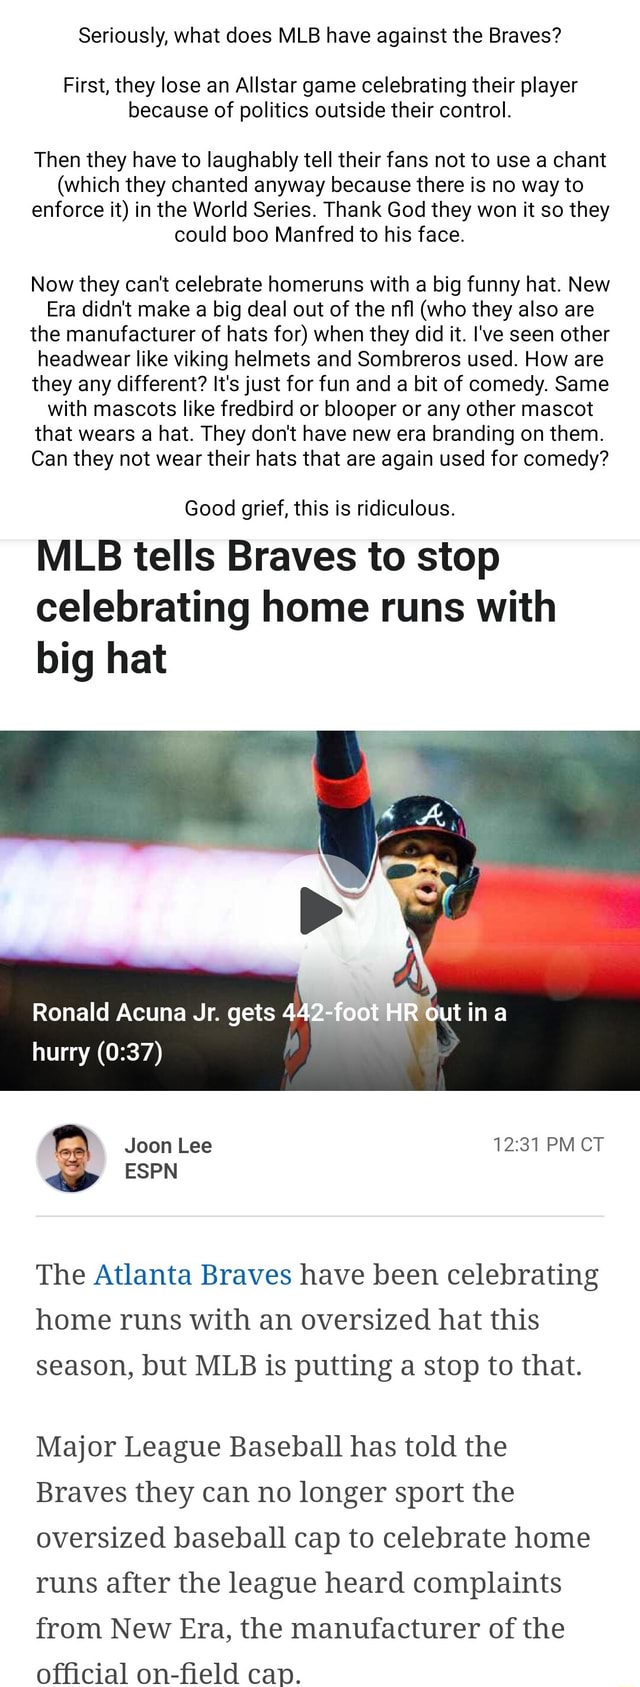 Braves were told to stop Big Hat celebration after New Era complained